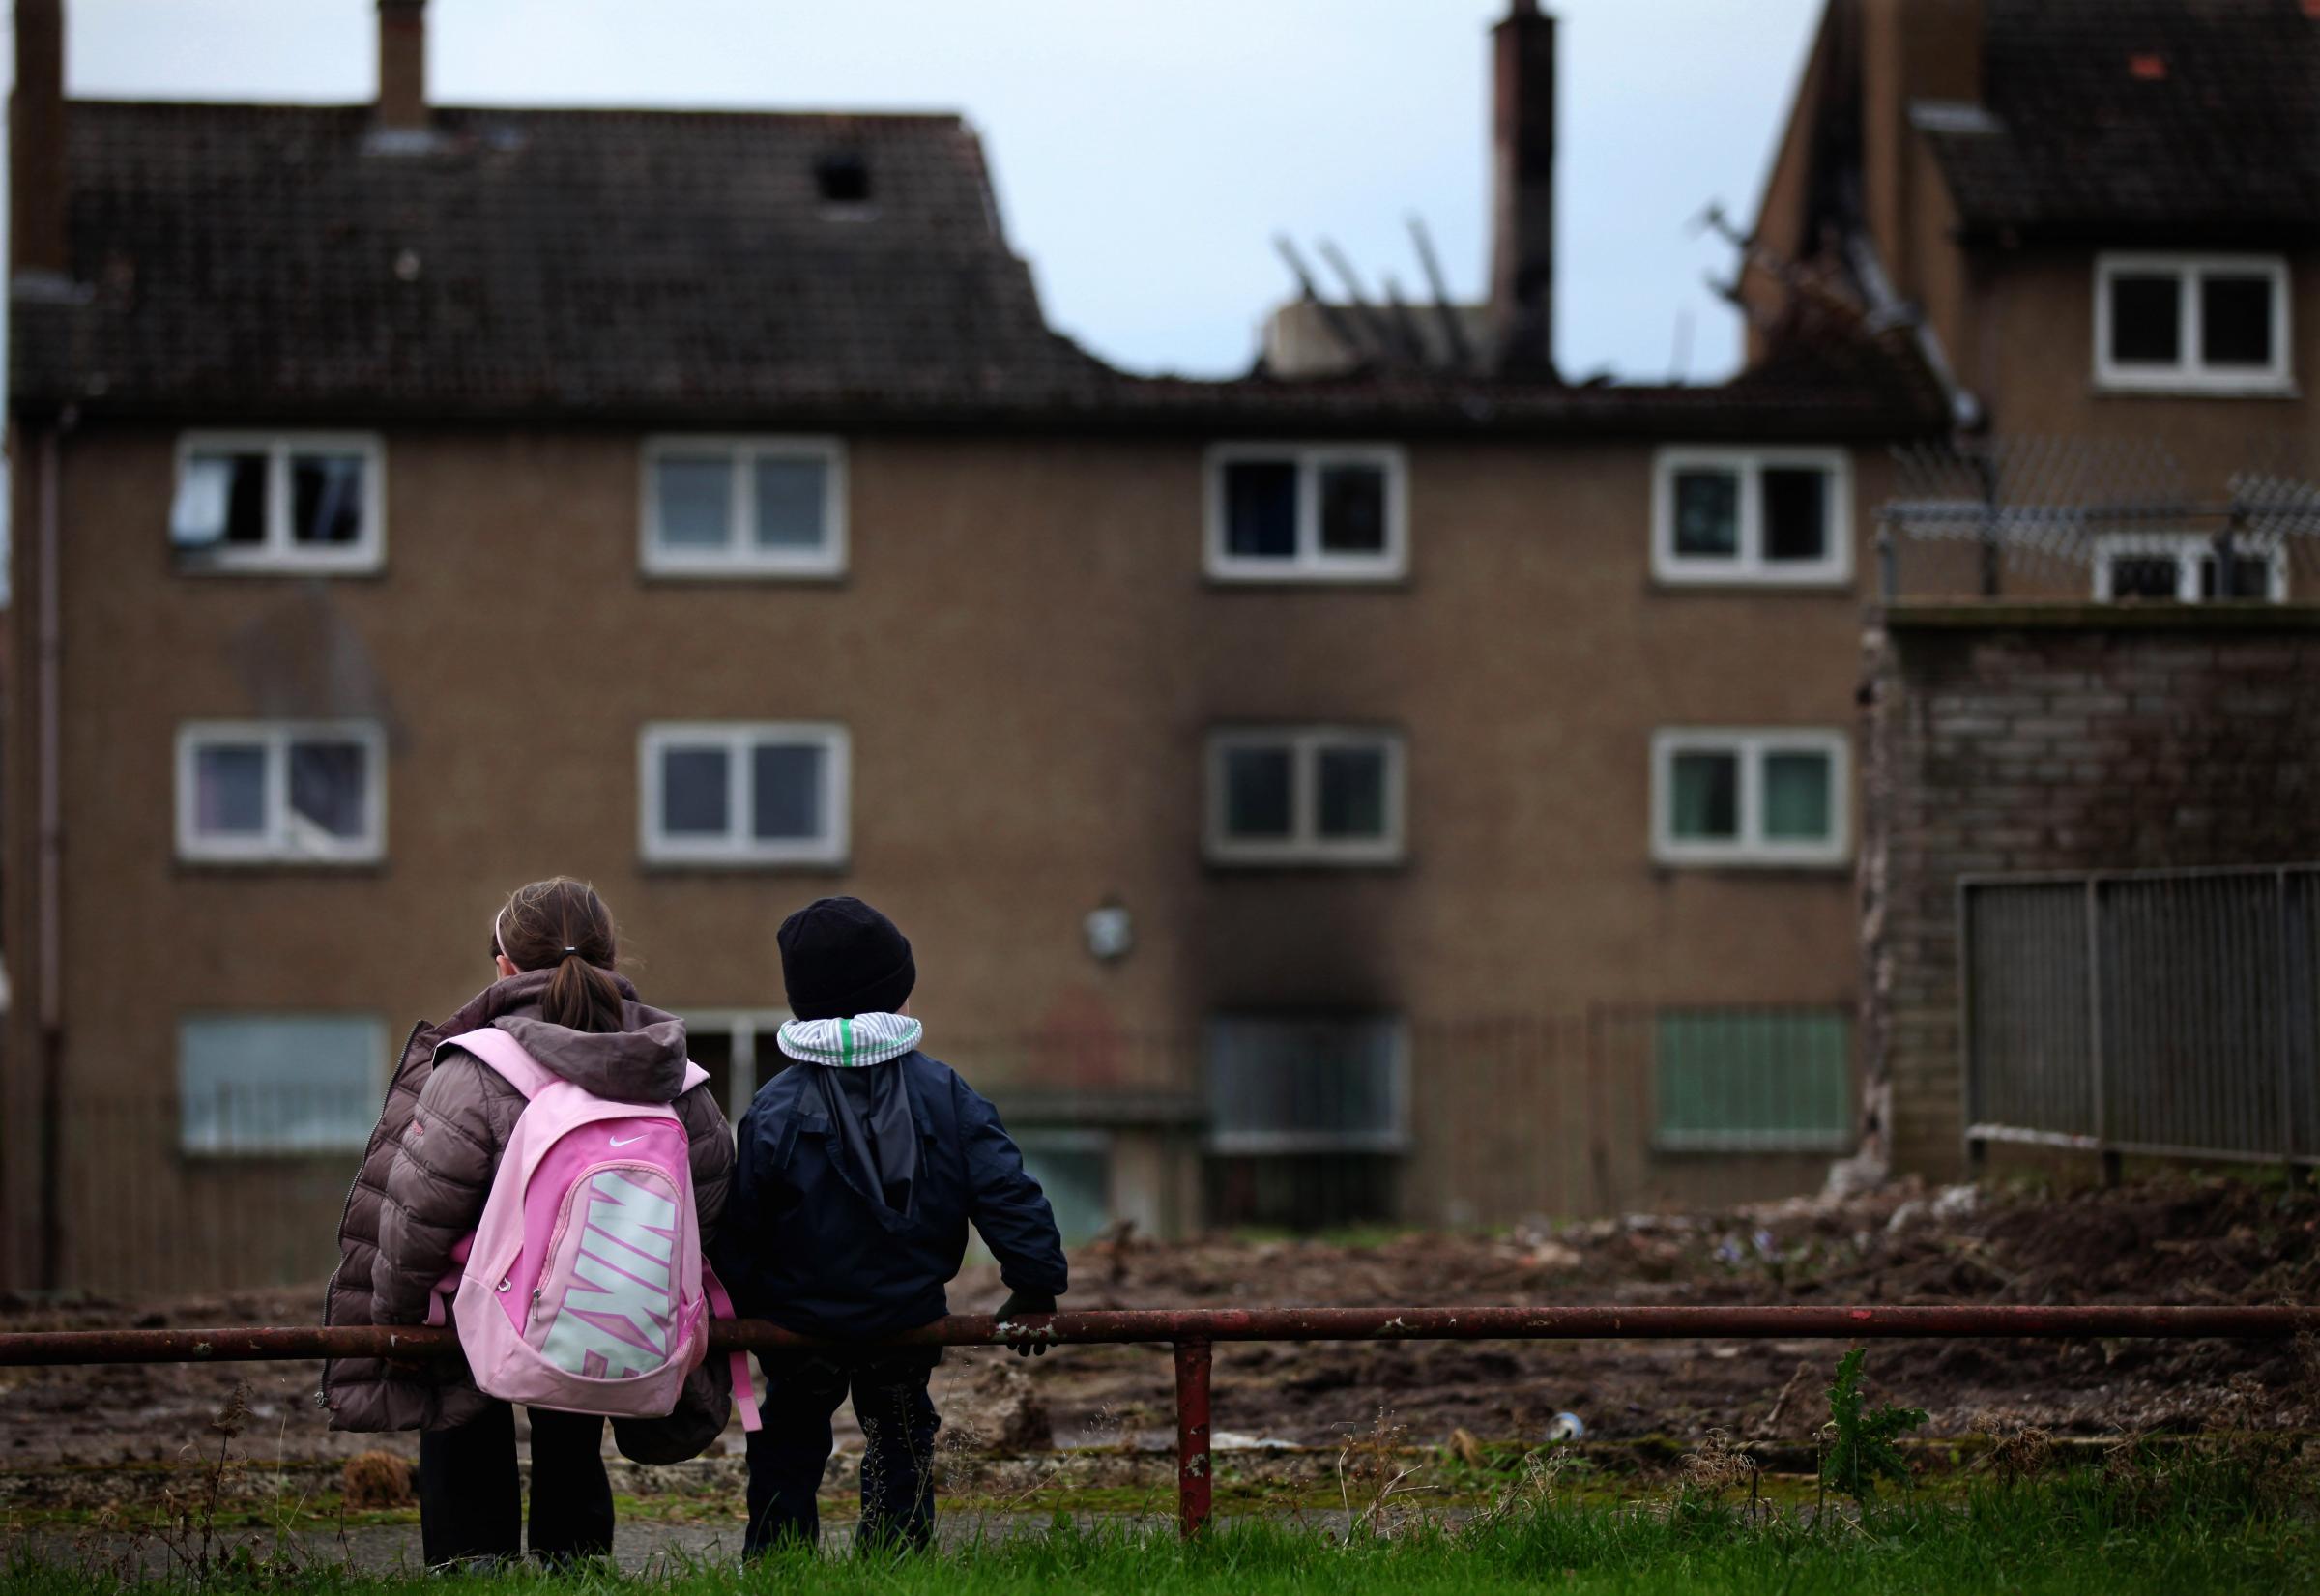 GLASGOW, SCOTLAND - NOVEMBER 18: Children make their way home from school in the Easterhouse housing estate on November 18, 2010 in Glasgow, Scotland. Thousands of homes in the poorest parts of the UK that were set for demolition may be left with people